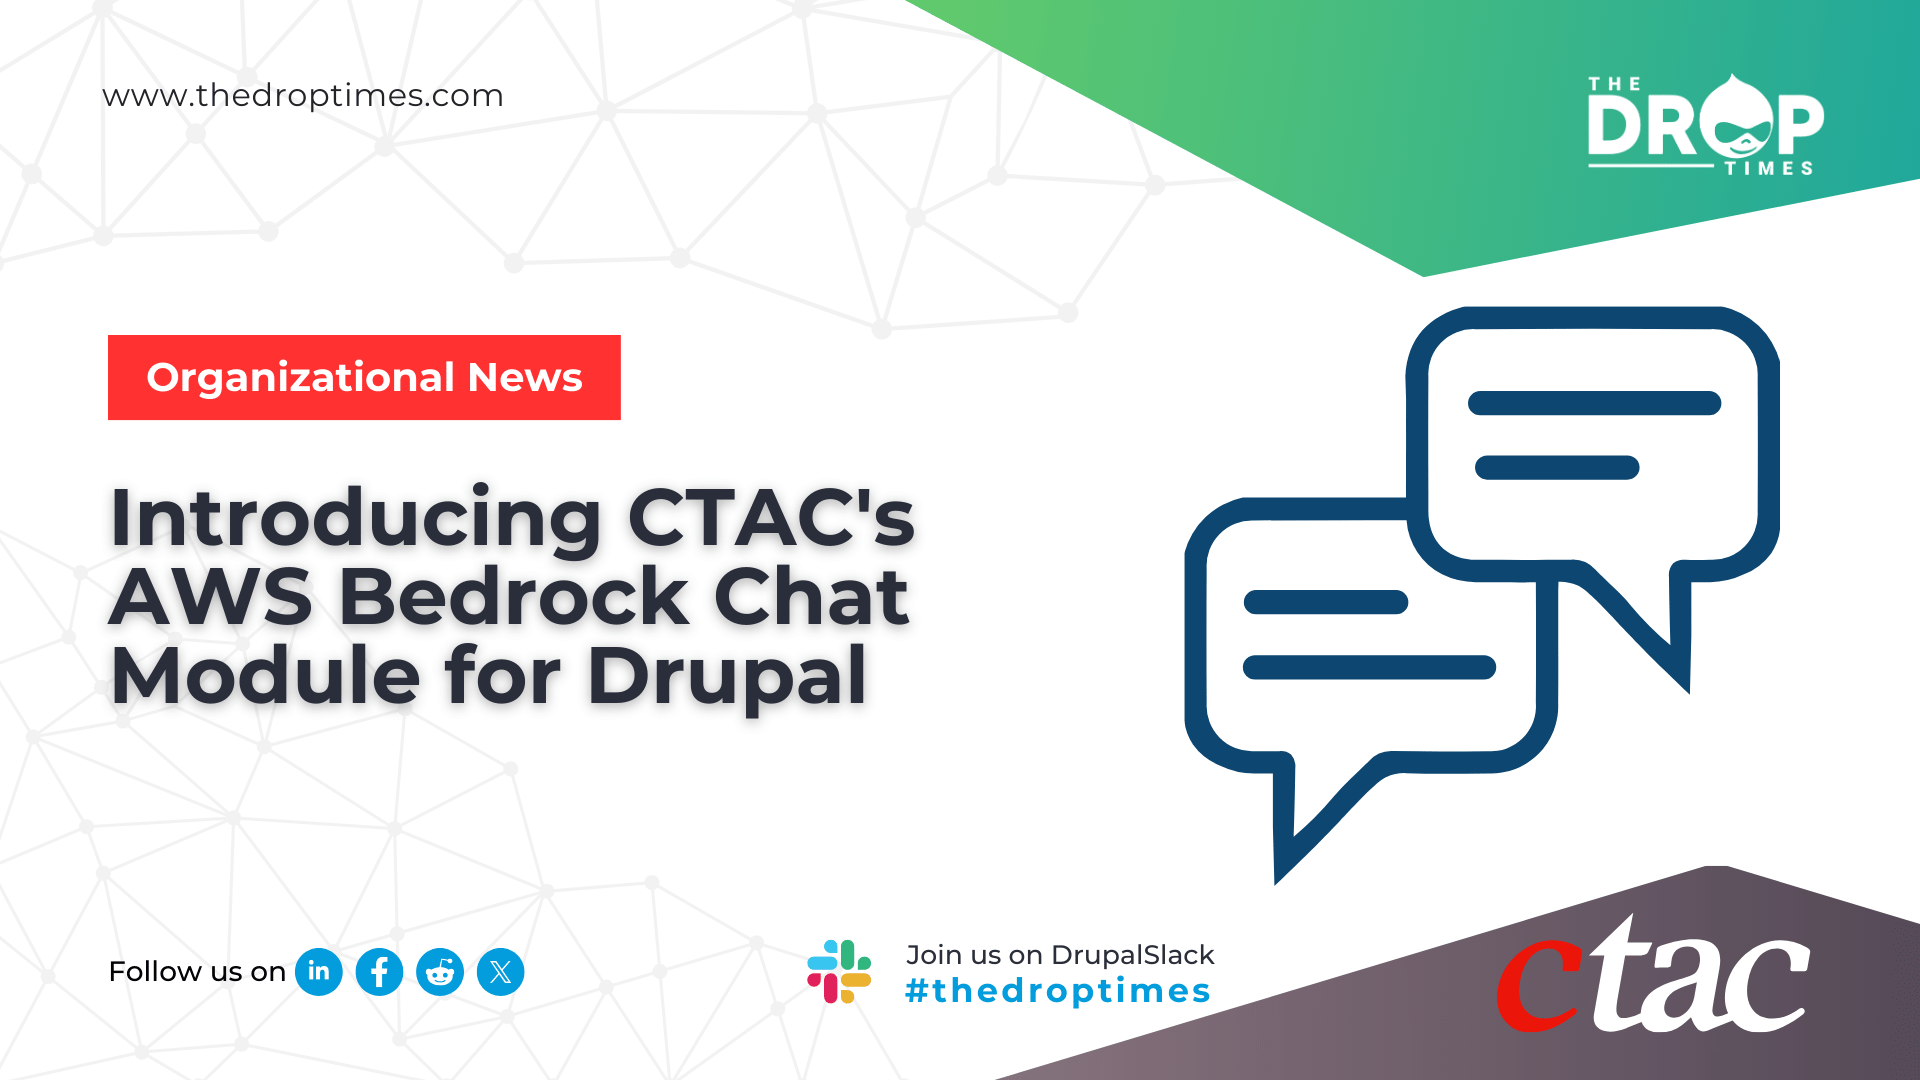 Introducing CTAC's AWS Bedrock Chat Module for Drupal